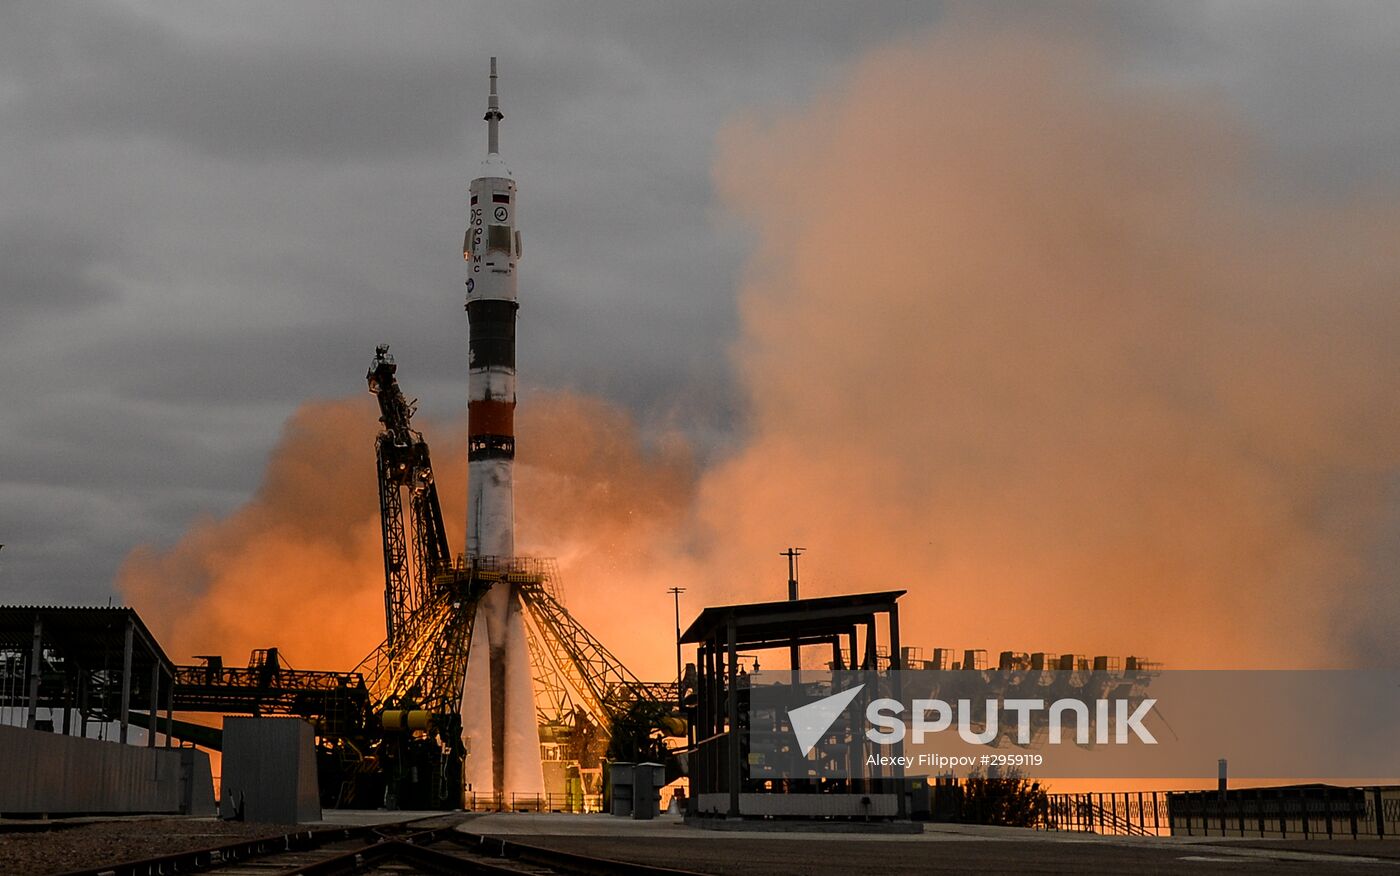 Launch of Soyuz MS-02 manned spacecraft from Soyuz-FG launch vehicle